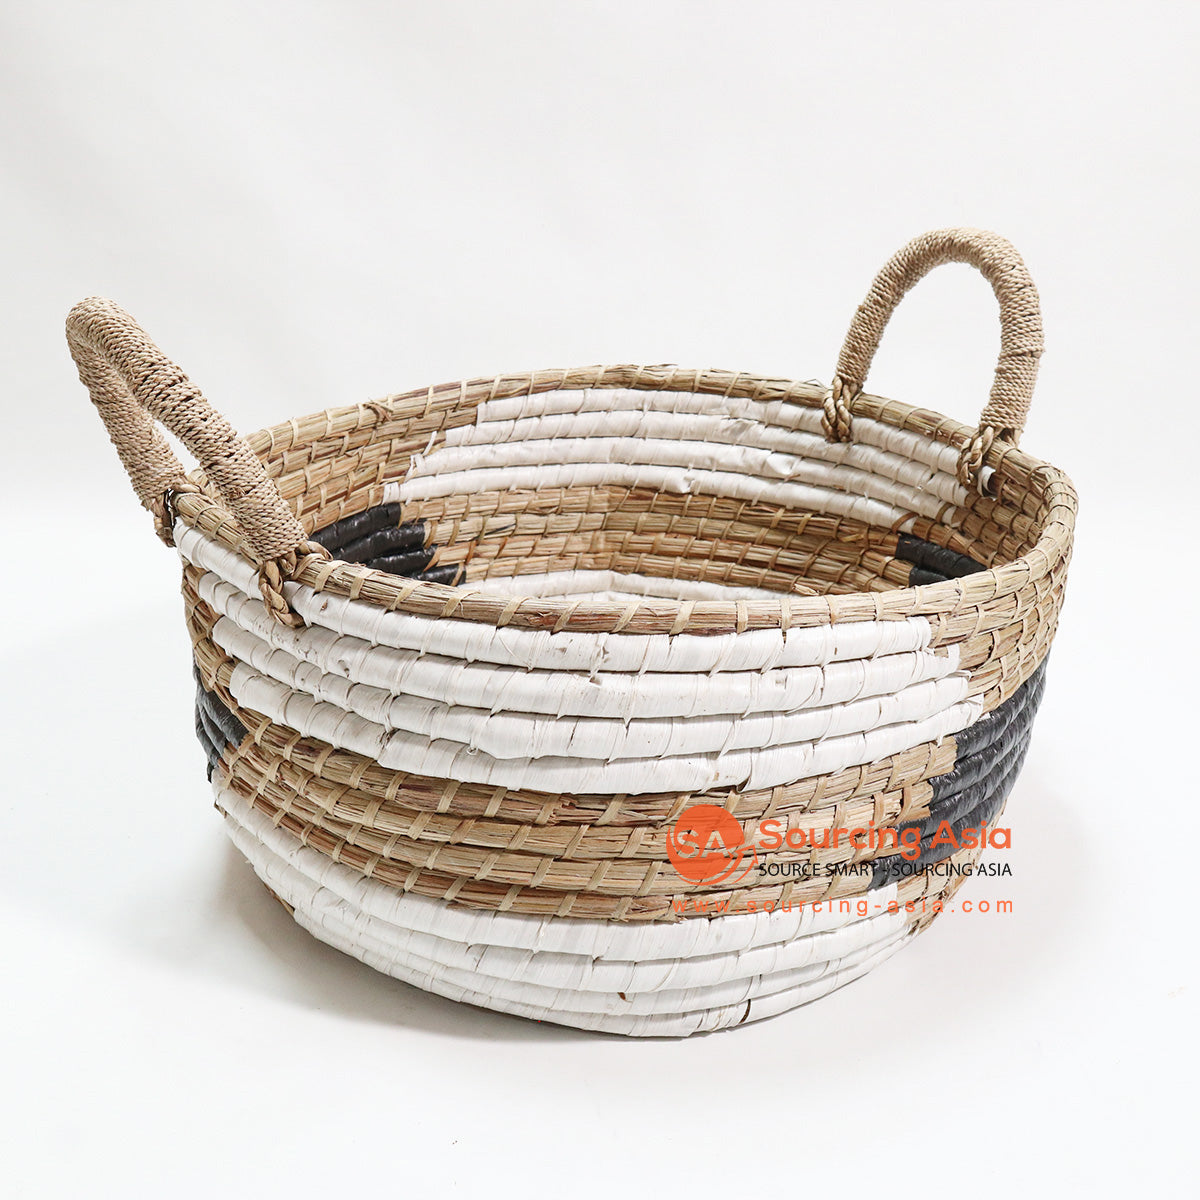 HBSC089 NATURAL WHITE AND GREY LARGE OPEN BASKET